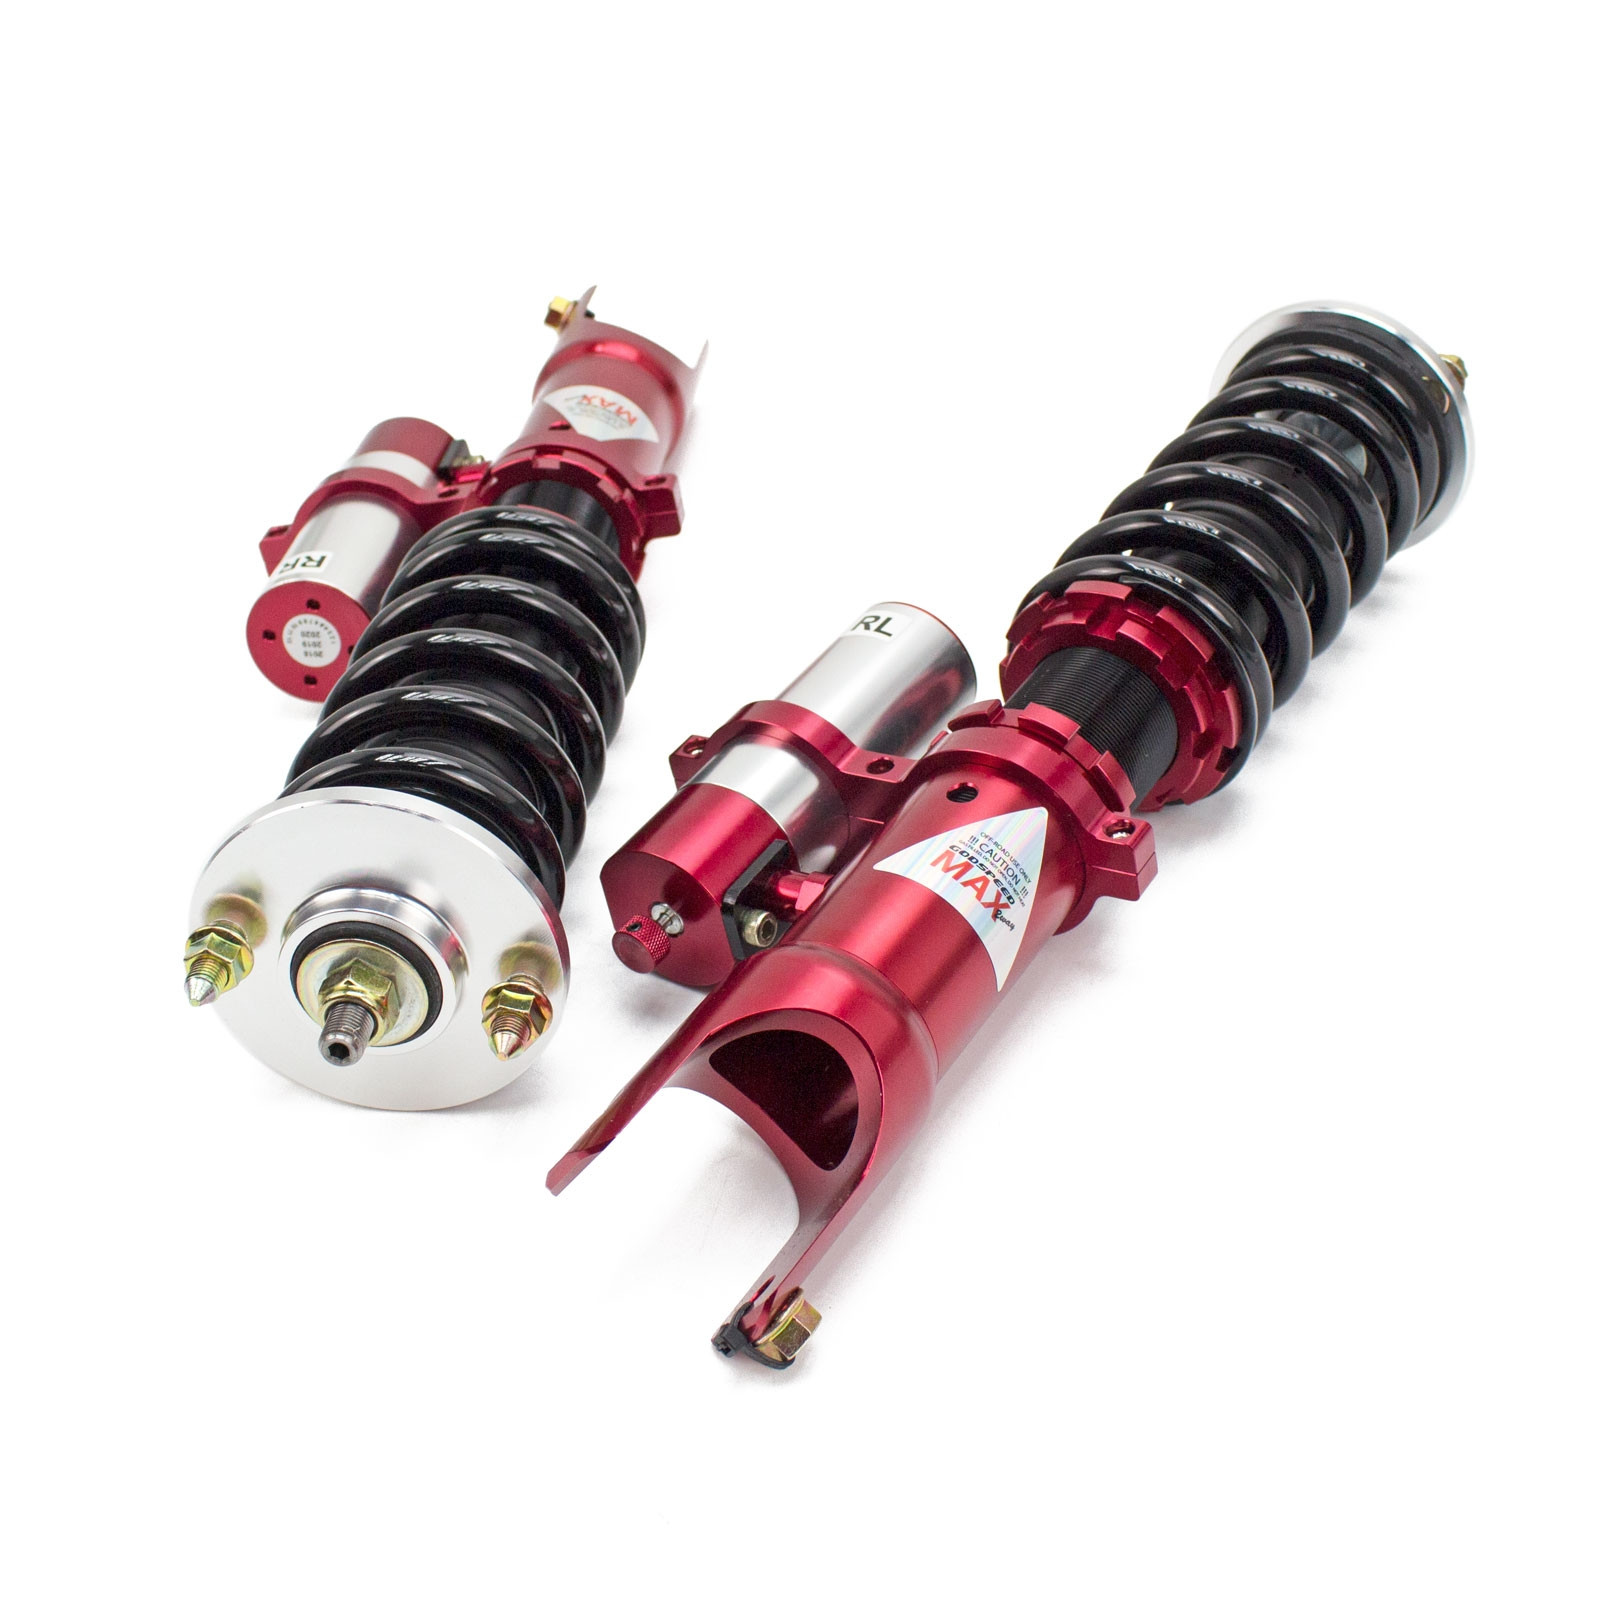 Lowering Kit for Honda Civic (EJ/EG/EH) 1992-95 MAXX 2-Way Coilover Dampers